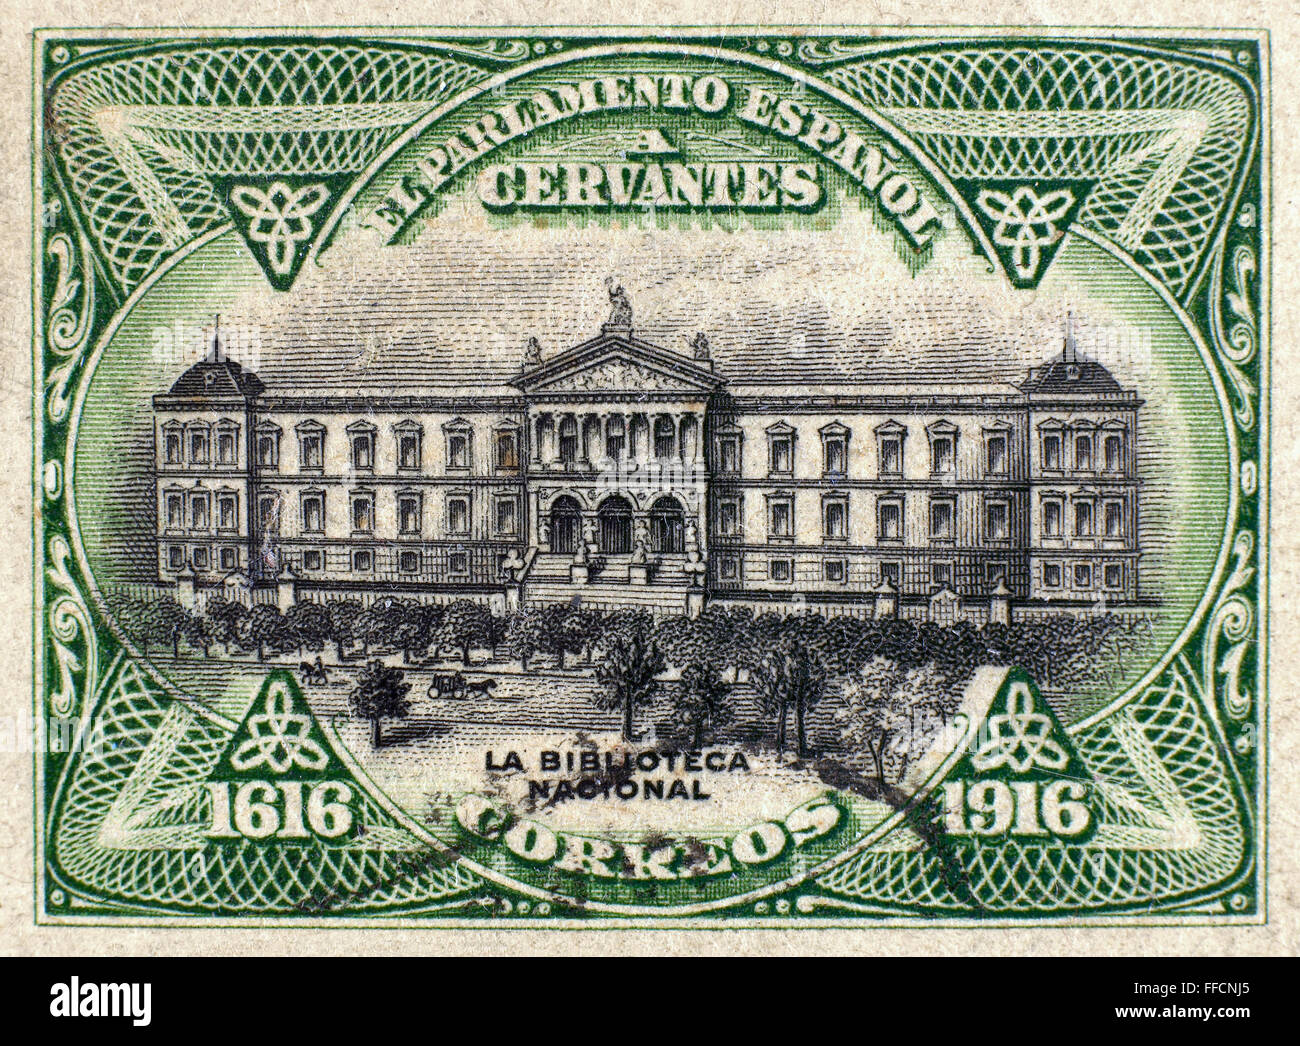 SPAIN: NATIONAL LIBRARY. /nThe National Library of Spain. On a postage stamp, 1916. Stock Photo